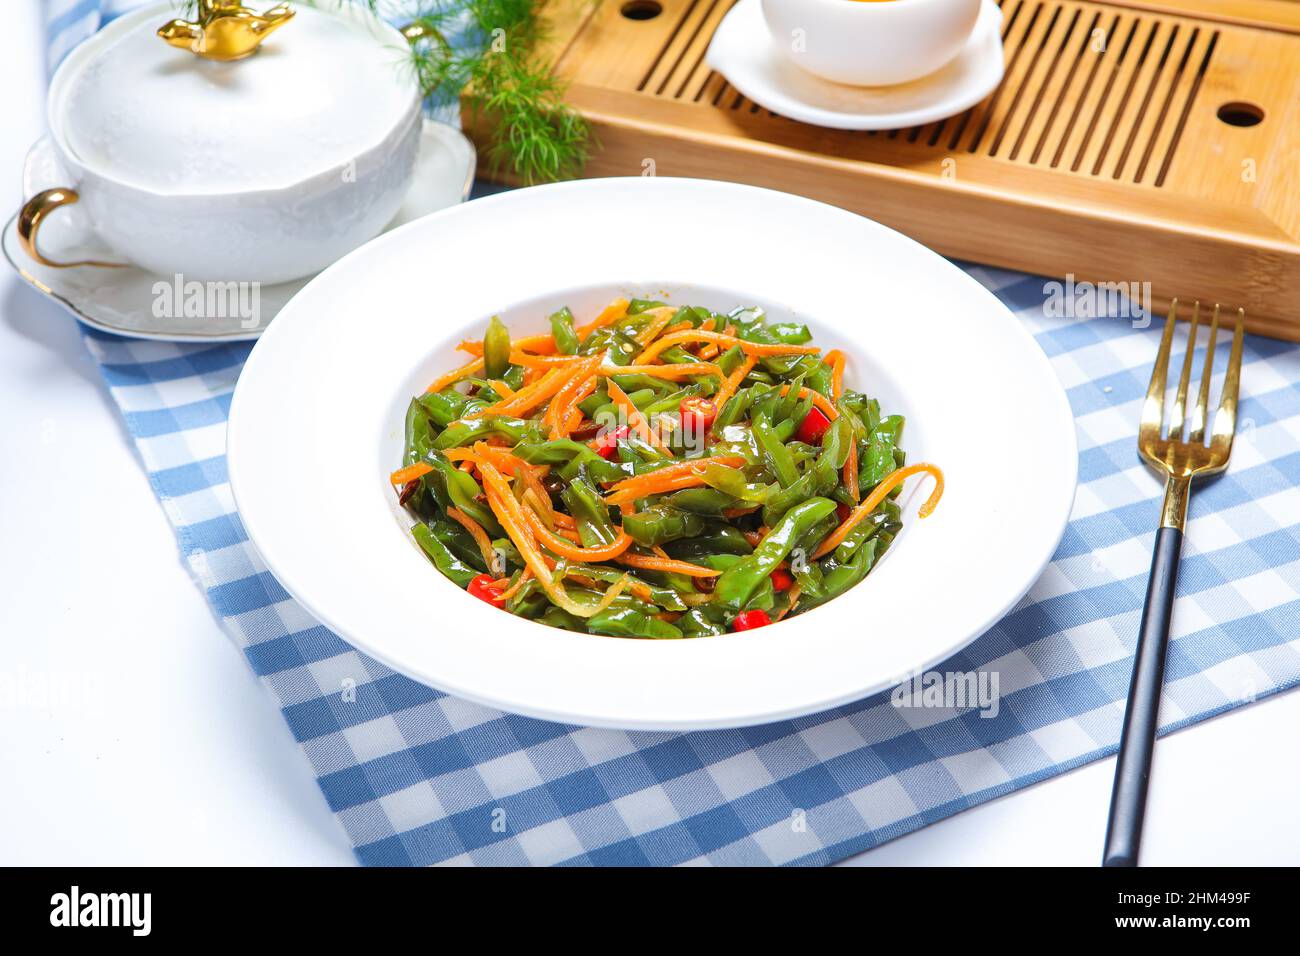 Cold wakame terrier Stock Photo